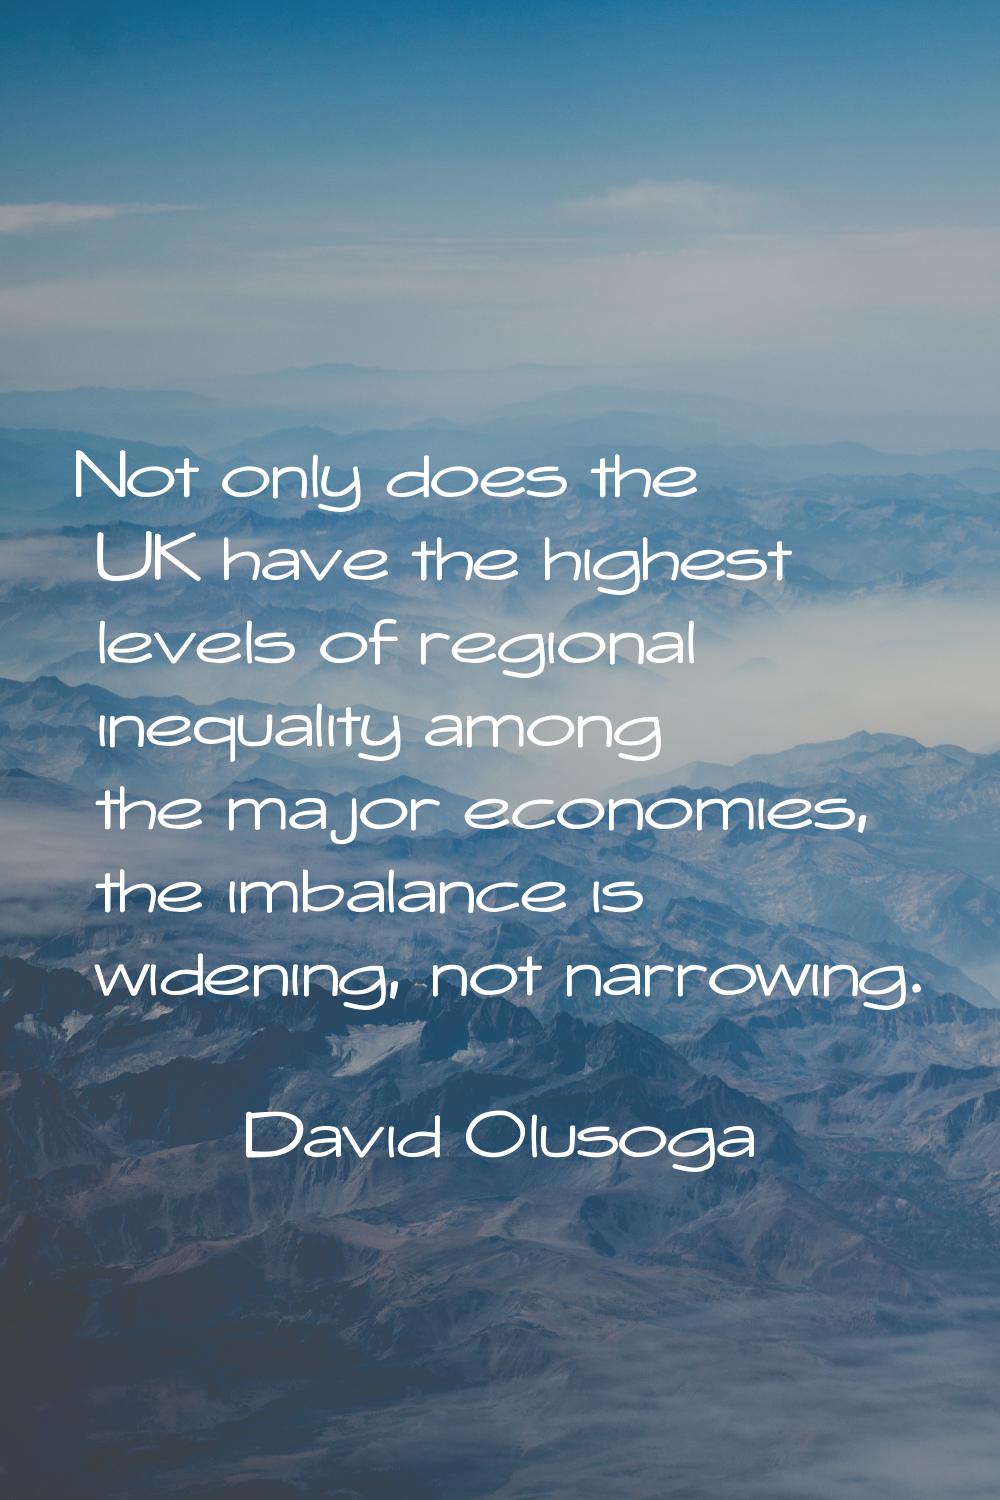 Not only does the UK have the highest levels of regional inequality among the major economies, the 